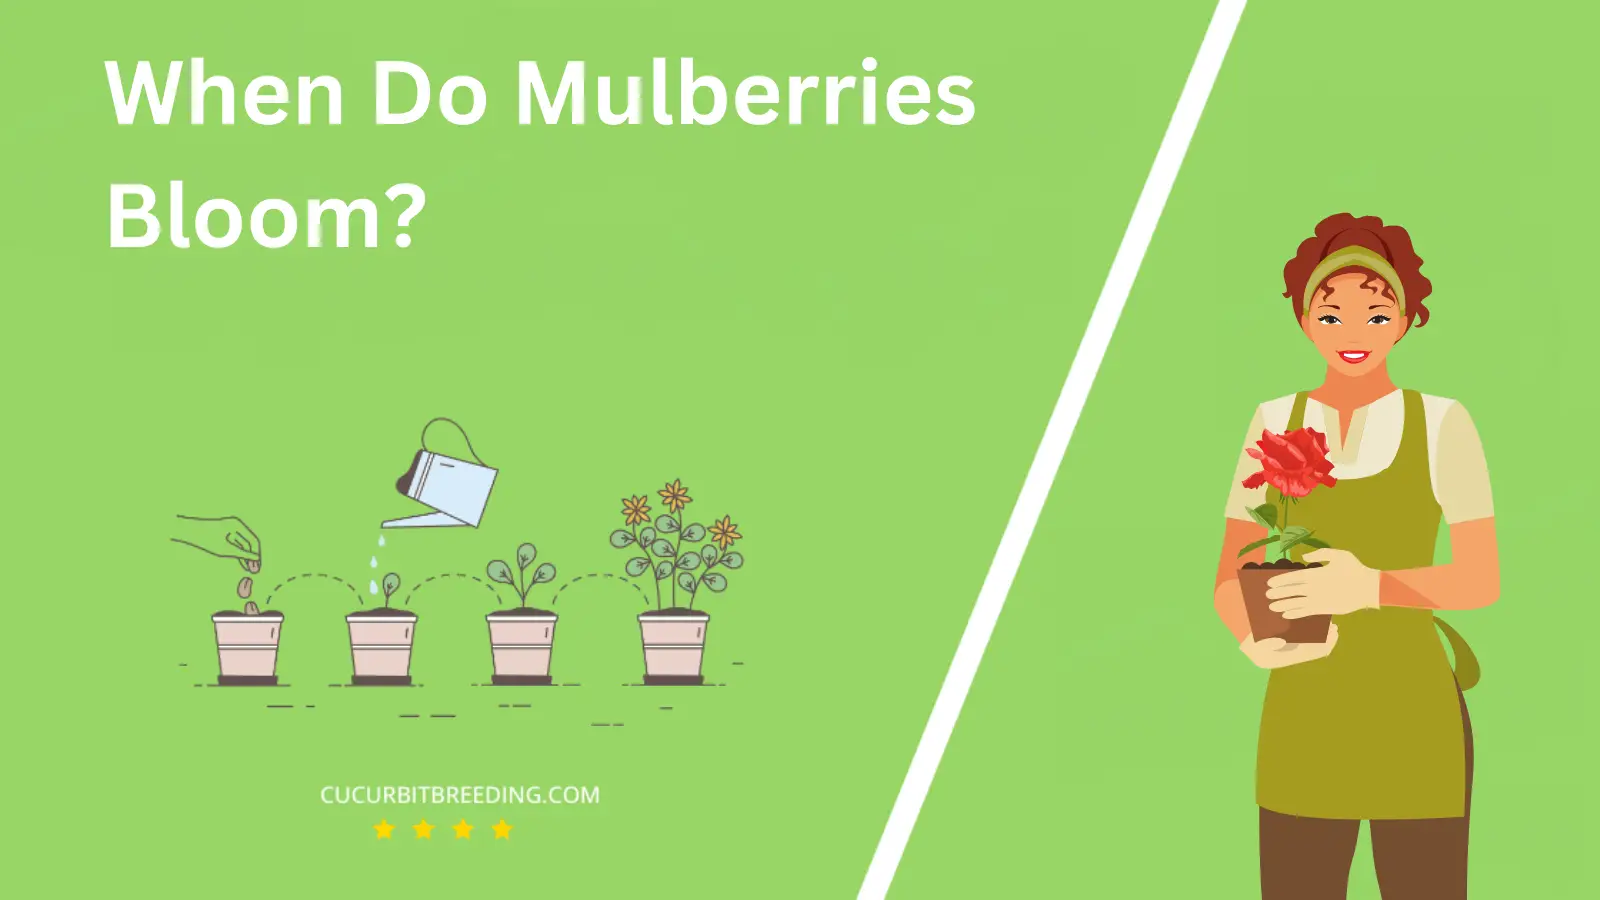 When Do Mulberries Bloom?